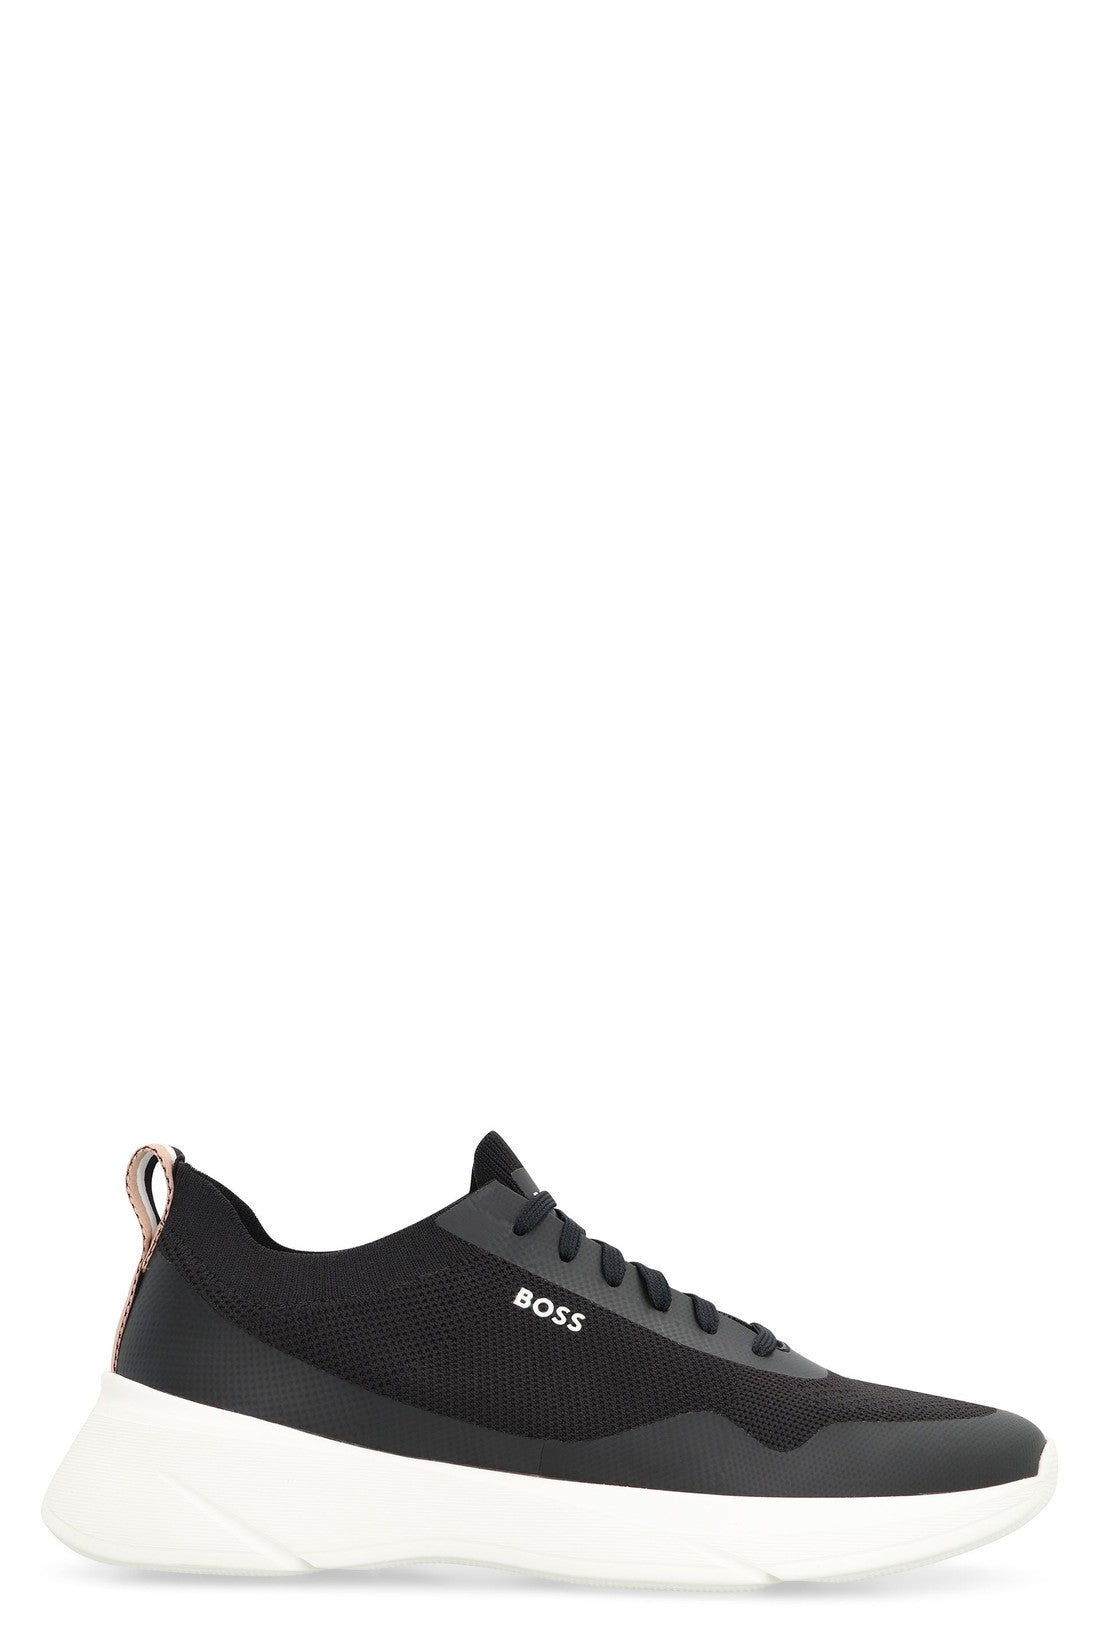 BOSS-OUTLET-SALE-Dean fabric low-top sneakers-ARCHIVIST